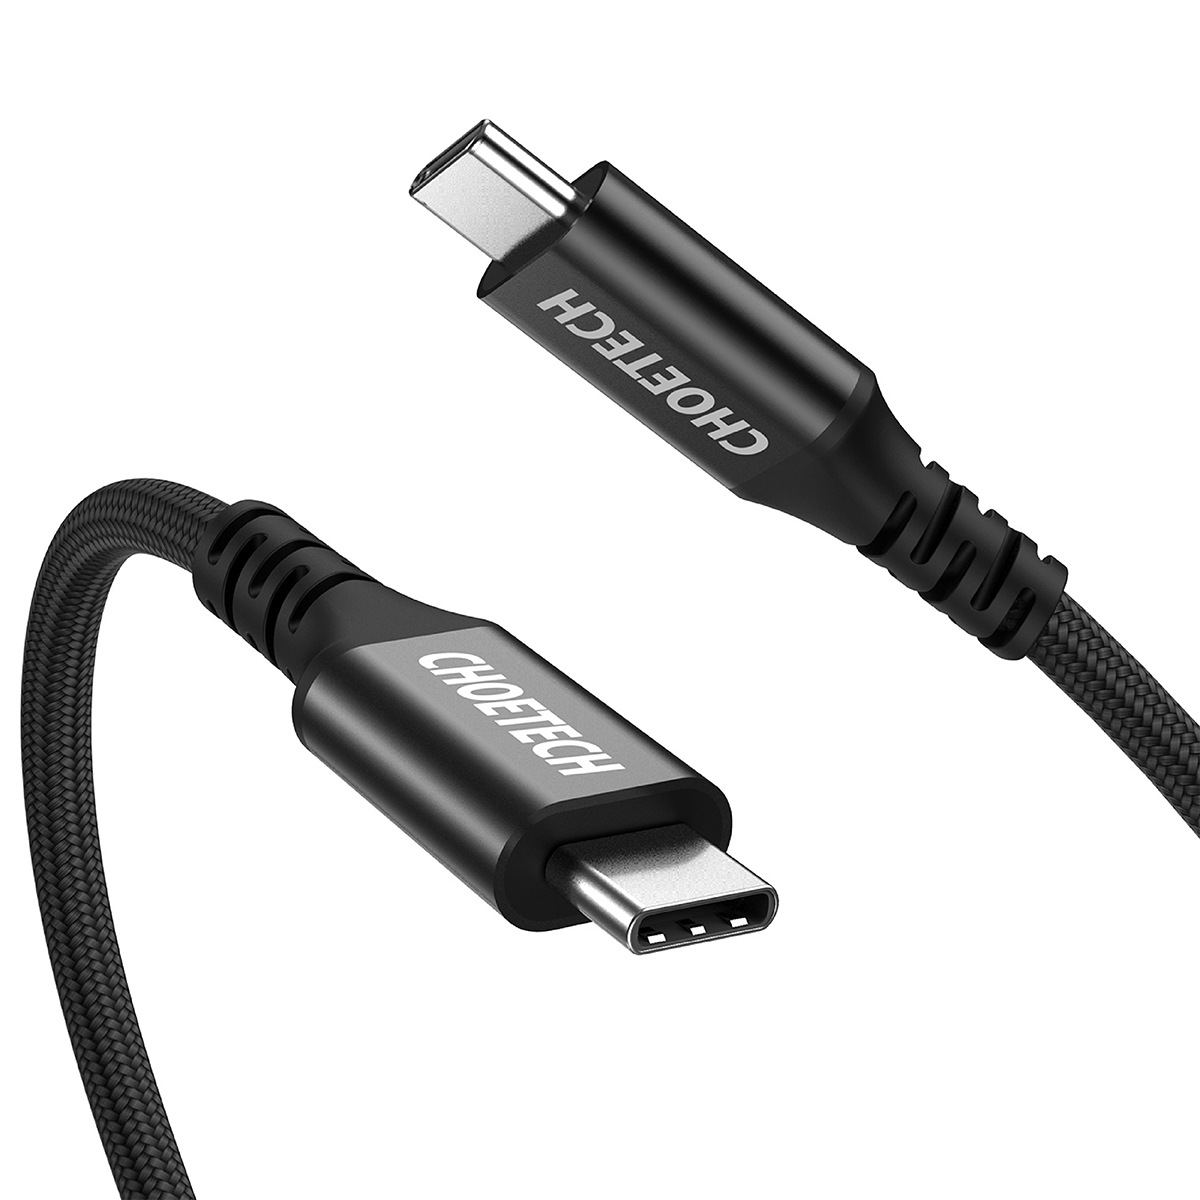 CHOETECH-100W-USB-C-to-USB-C-PD-30-Cable-USB-31-gen2-10Gbps-Data-Sync-Cord-4K-HD-Display-Video-Outpu-1694675-1